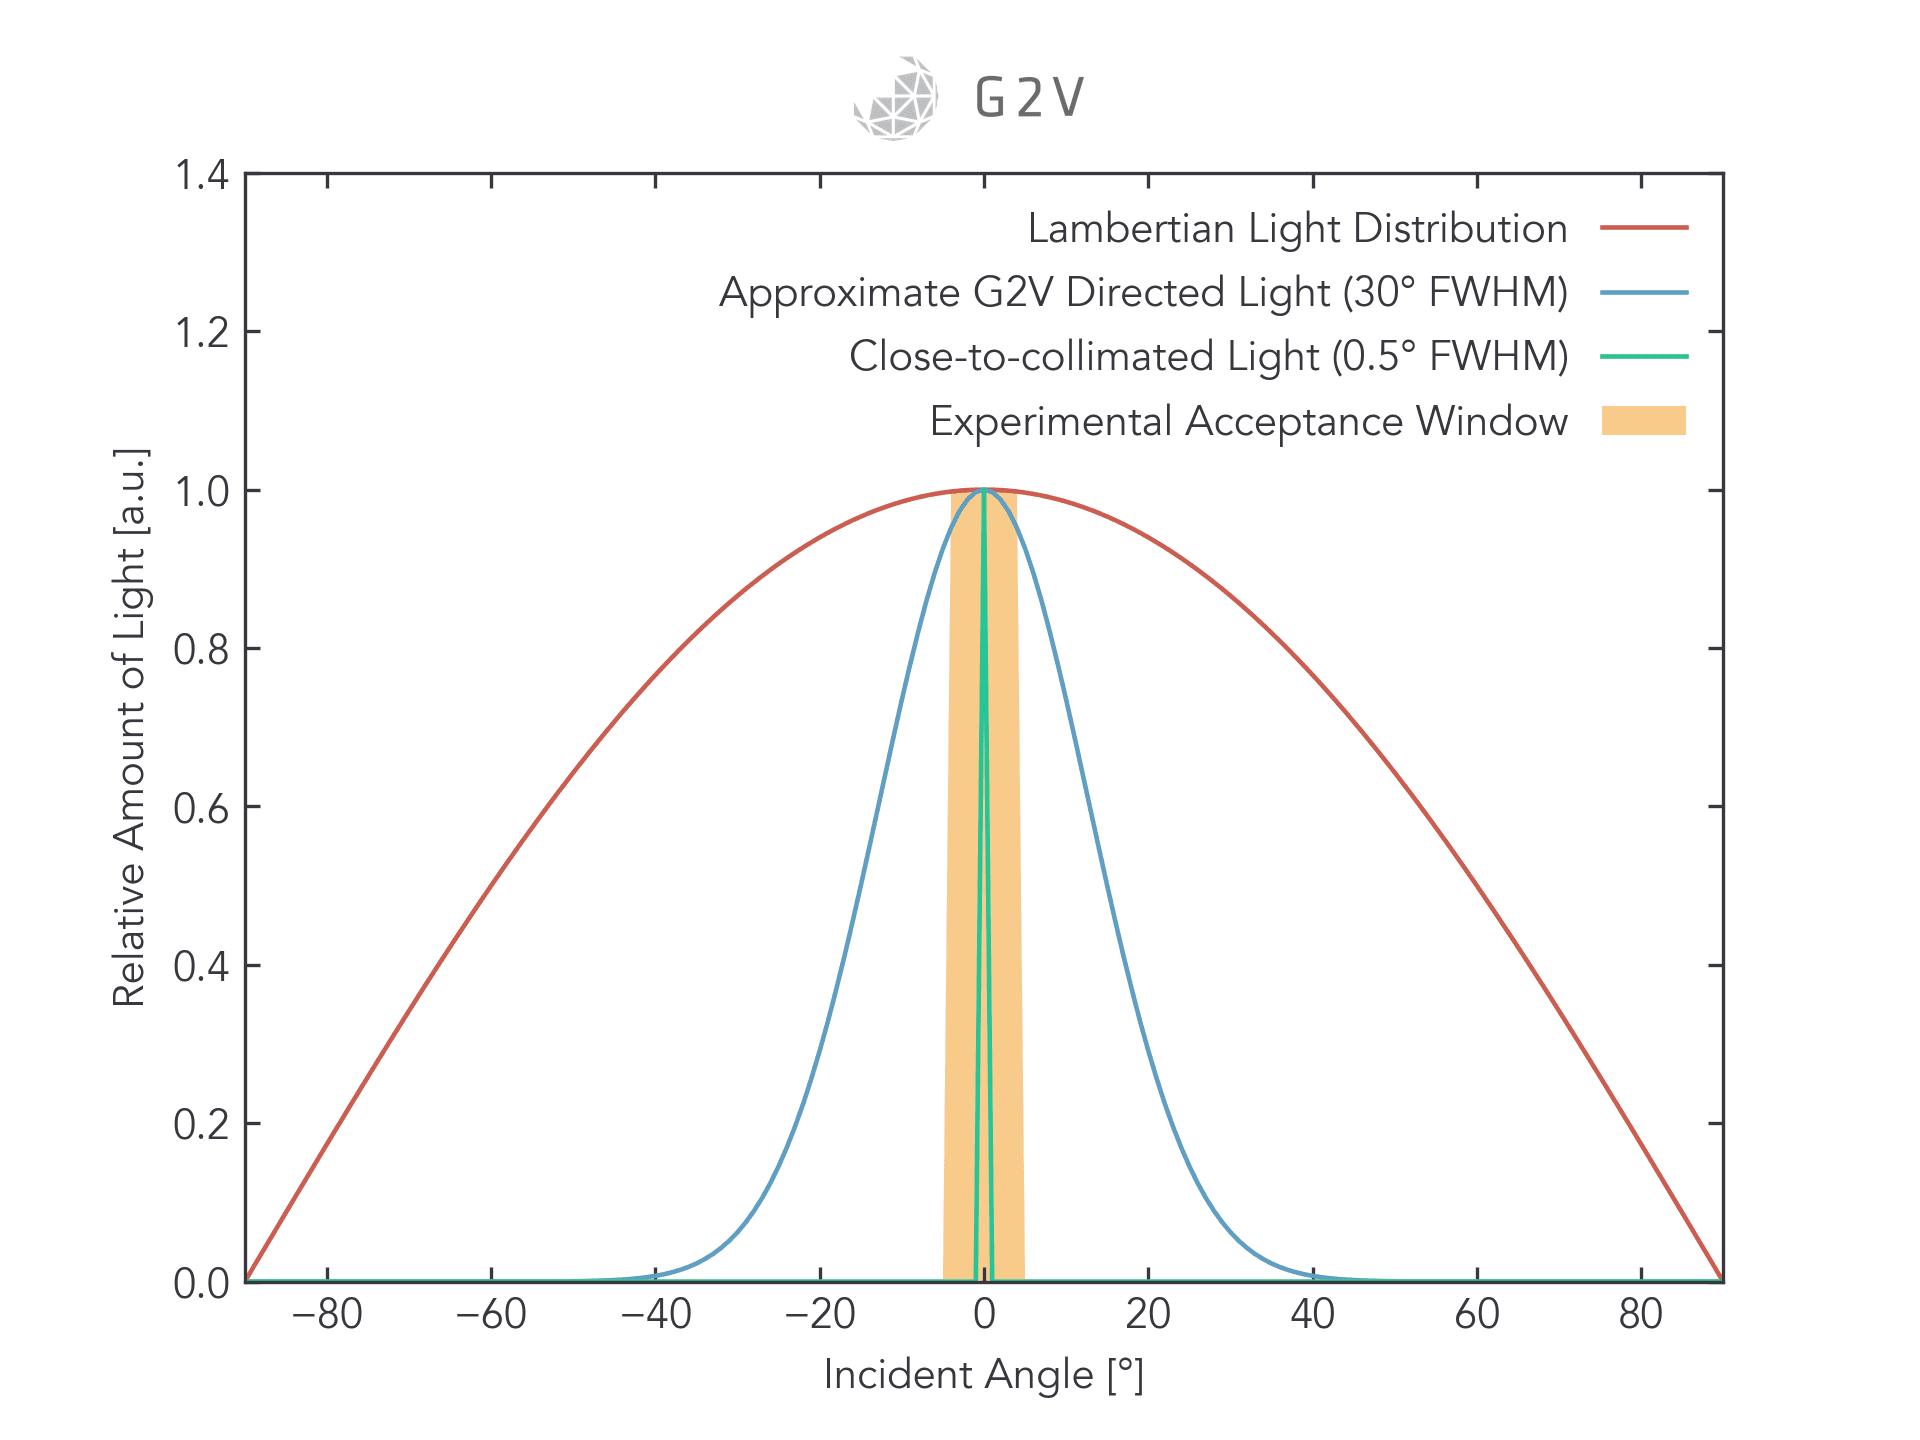 An example of a narrow experimental acceptance window, showing that you’ll need a different solar simulator or other strategies to achieve full replication of sunlight on your sample(s). In this case, the G2V Directed Light does not fit the experiment.